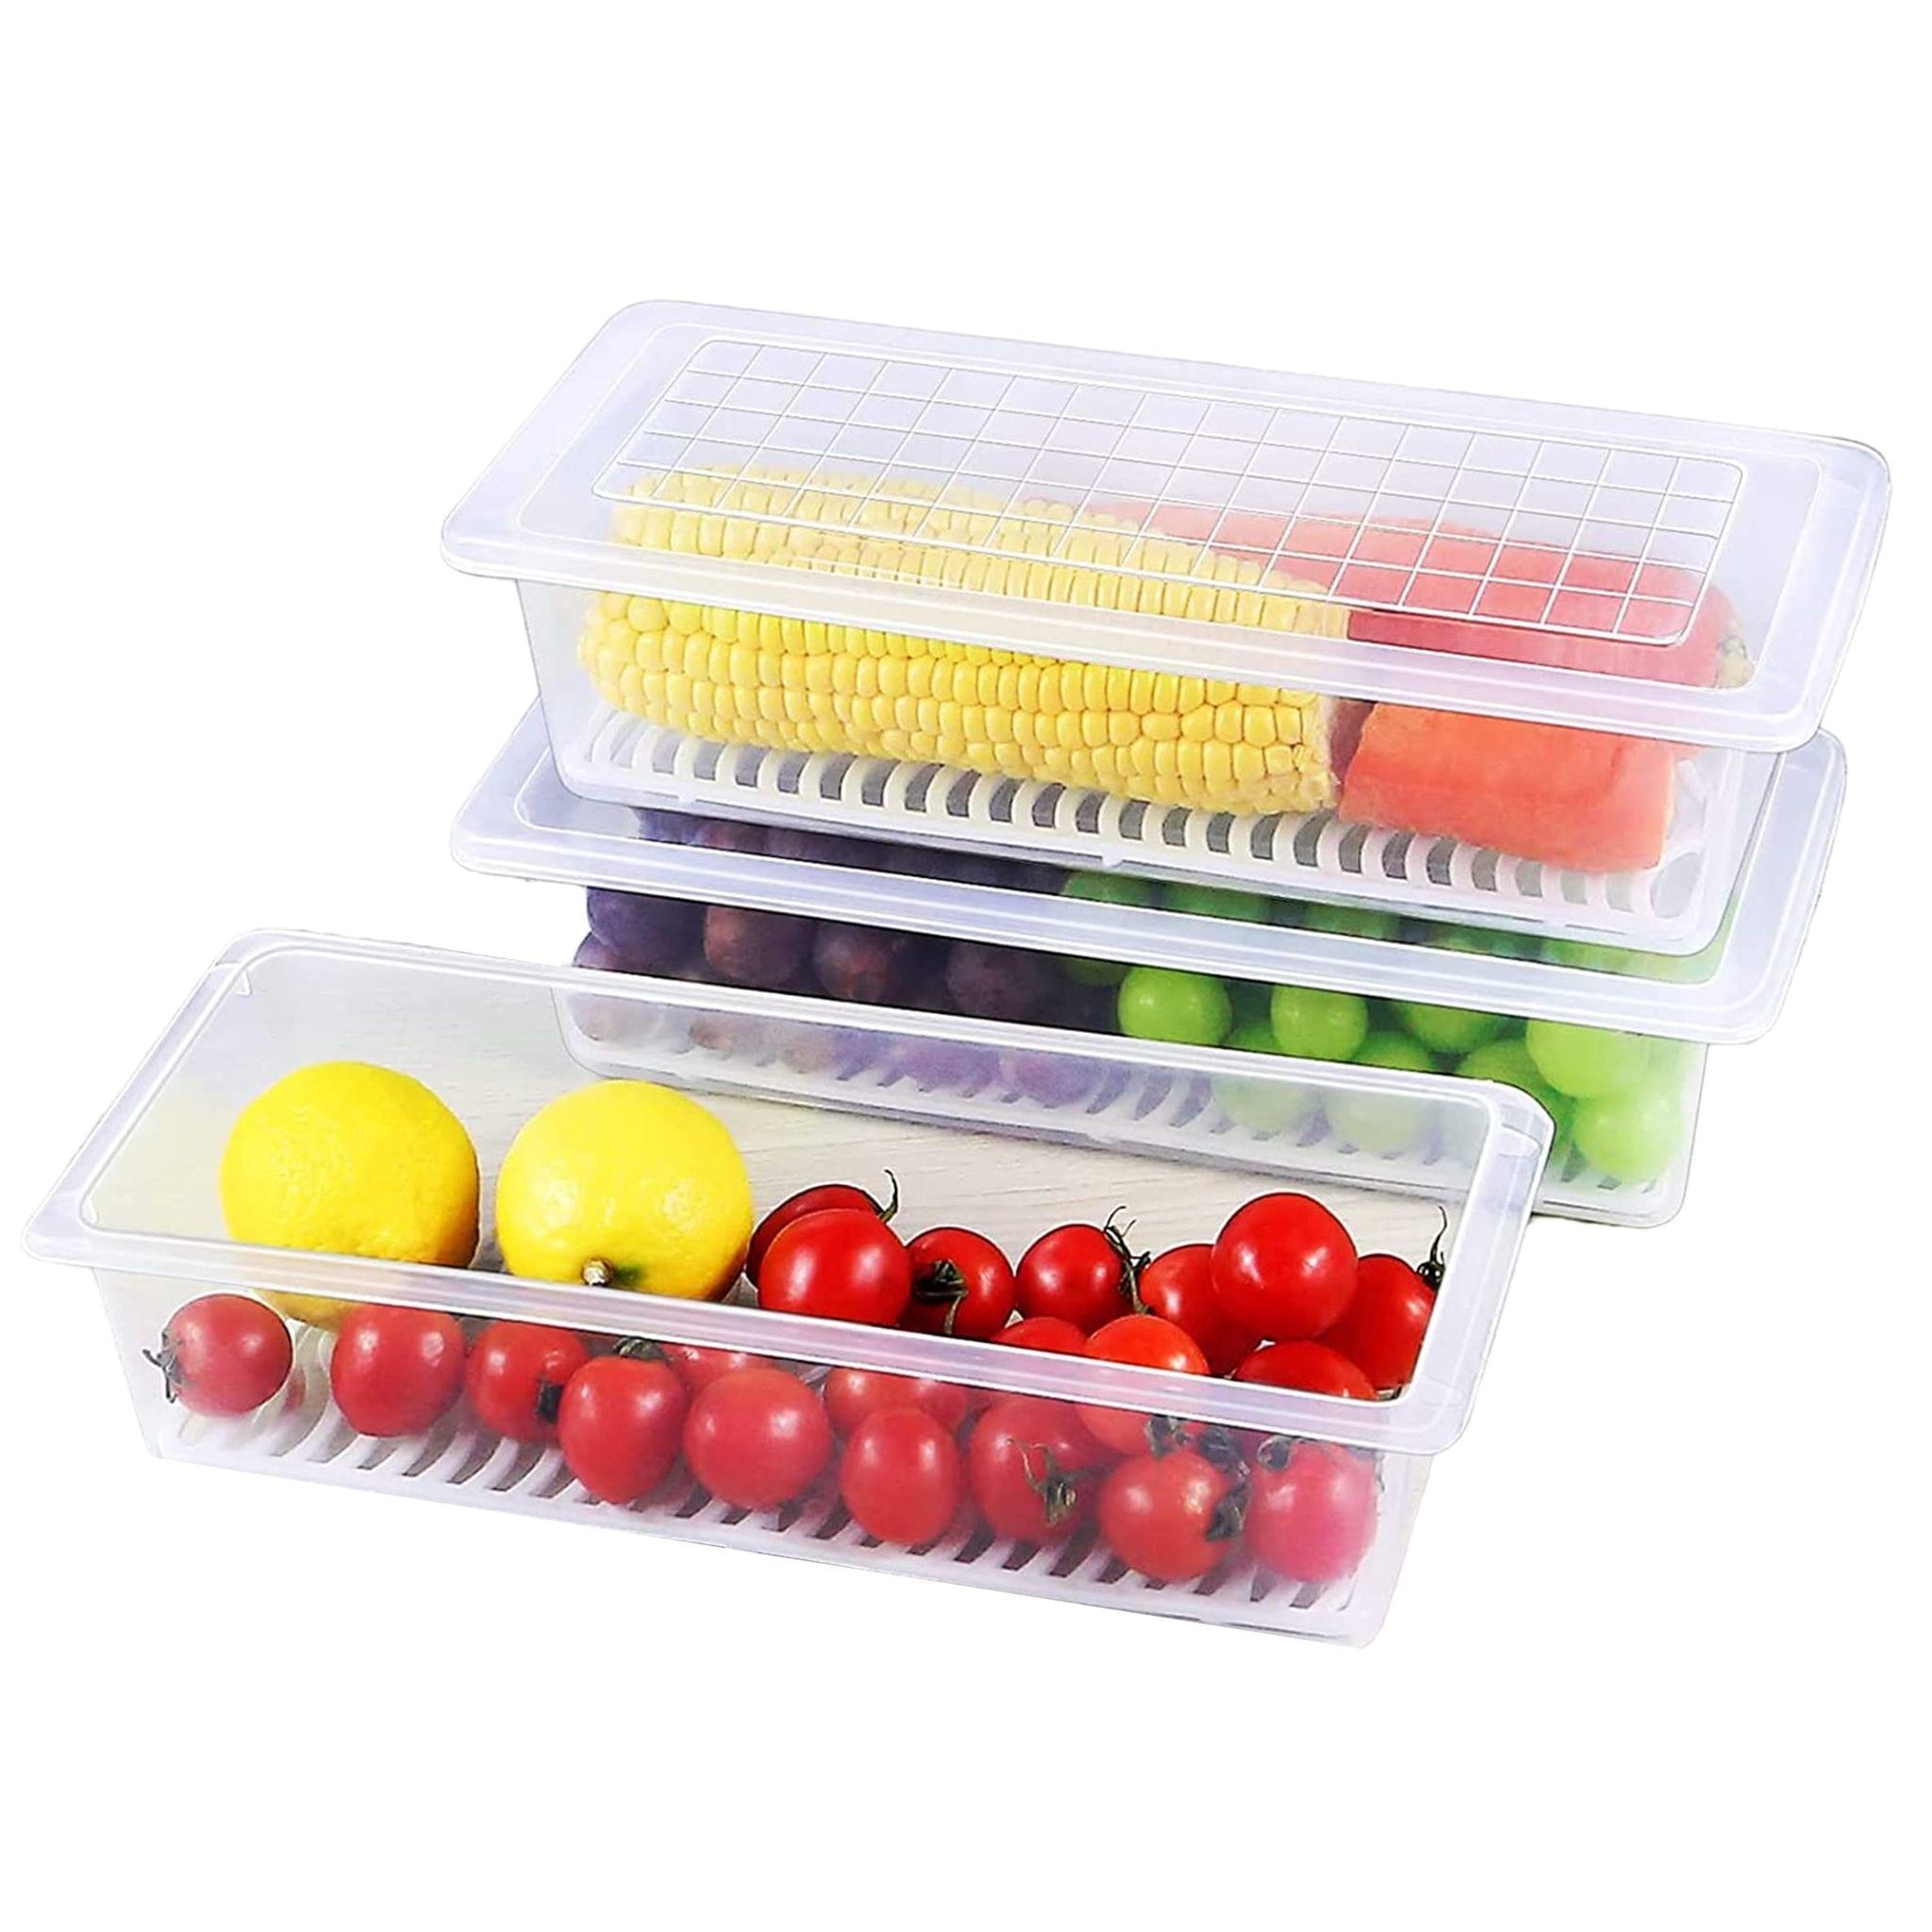 Tdas fridge plastic boxes for storage box container food containers trays  kitchen set organizer freezer refrigerator